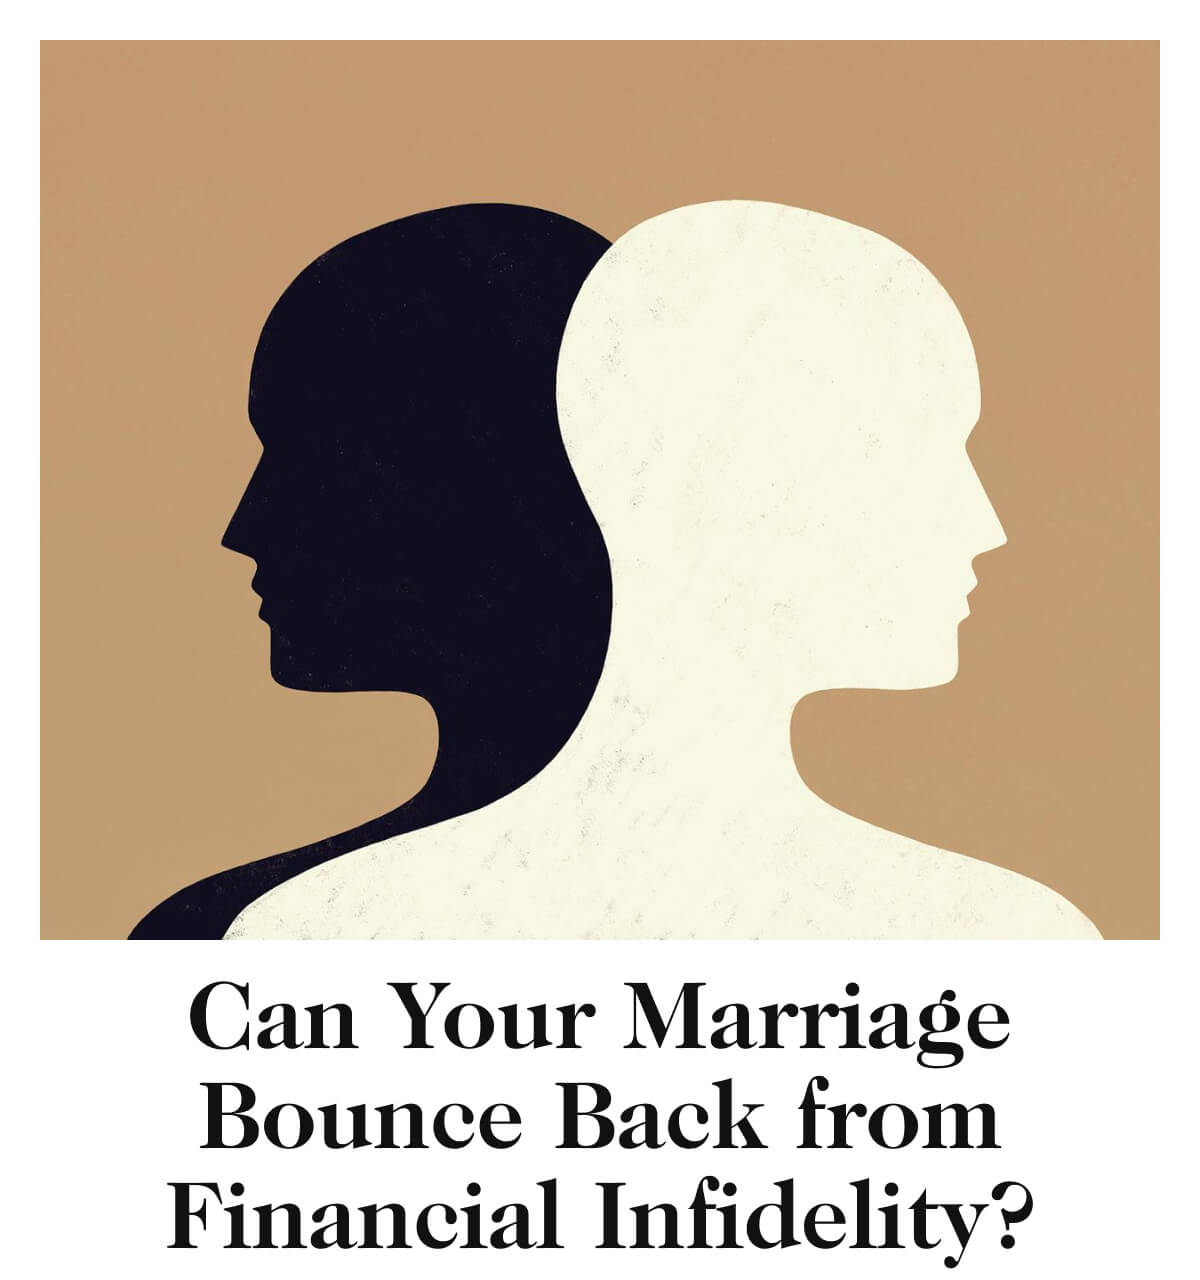 Can Your Marriage Bounce Back from Financial Infidelity?